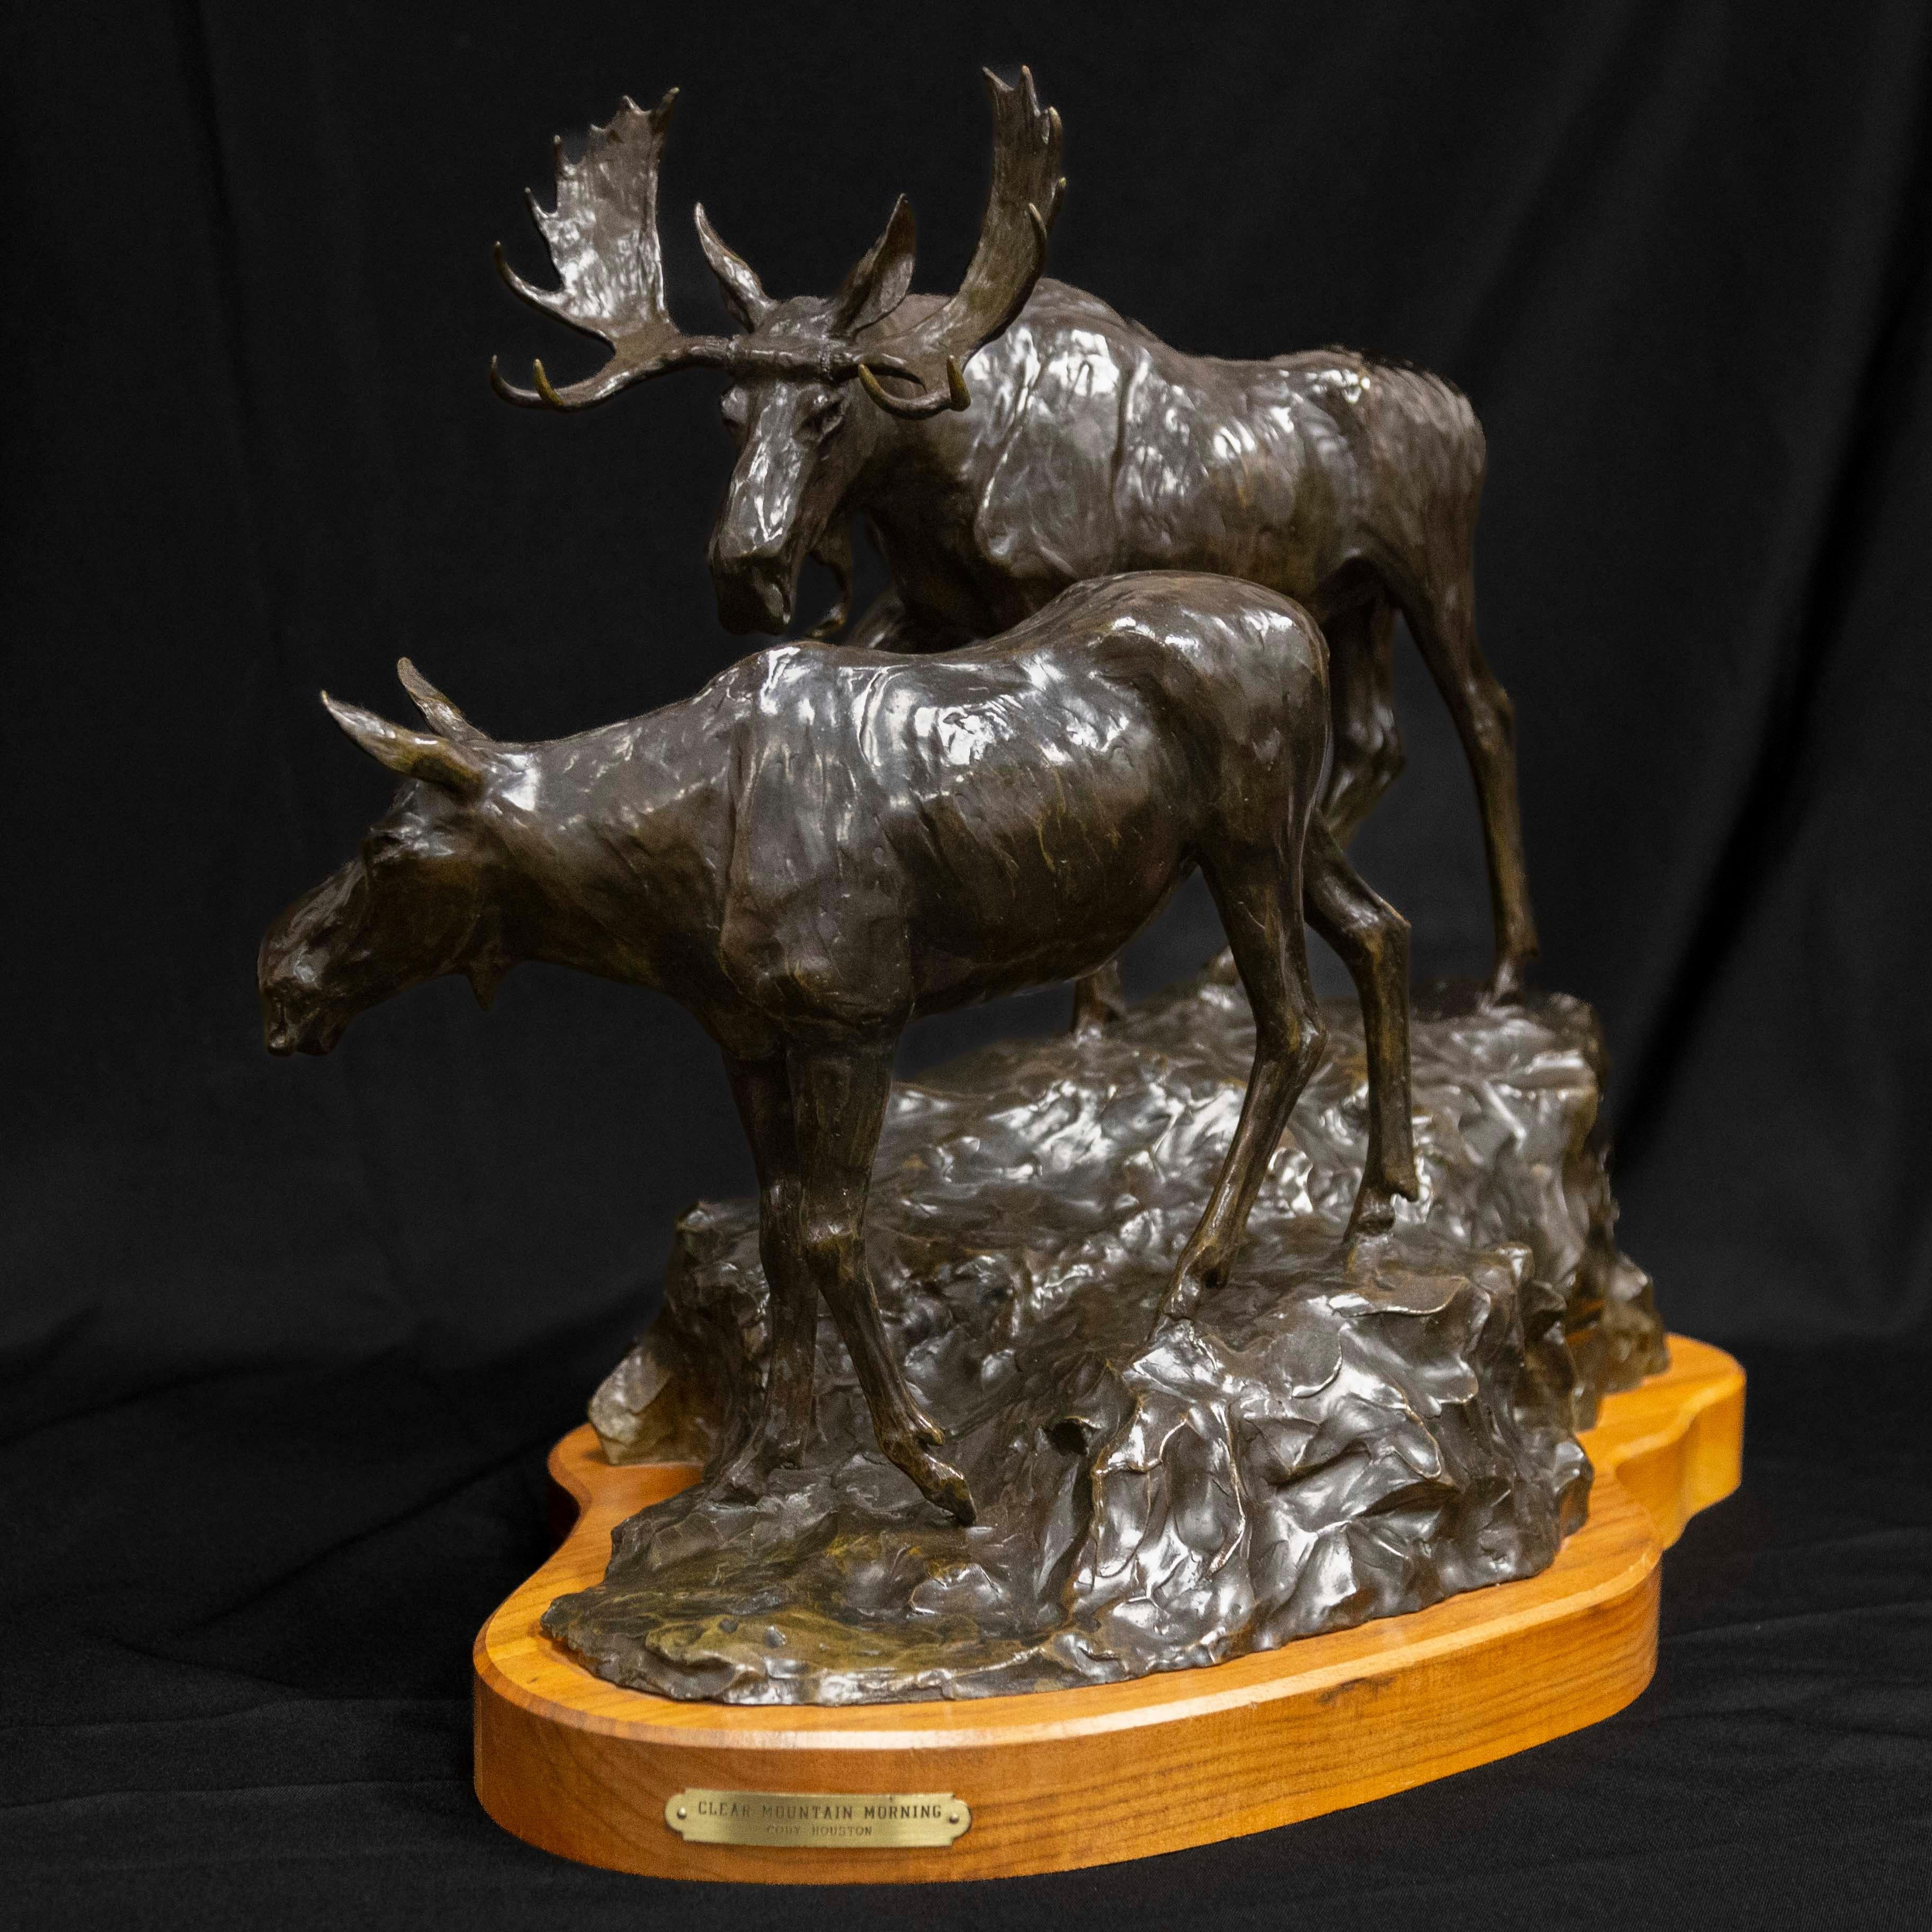 "Clear Mountain Morning" by Cody Houston, Limited Edition Bronze with Wooden Plinth, 18" x 21" x 13", Edition #4/15, signed and numbered on back, titled on plaque.
Provenance: Cast in 1977, private collection, then bought at auction in 2014
Cody